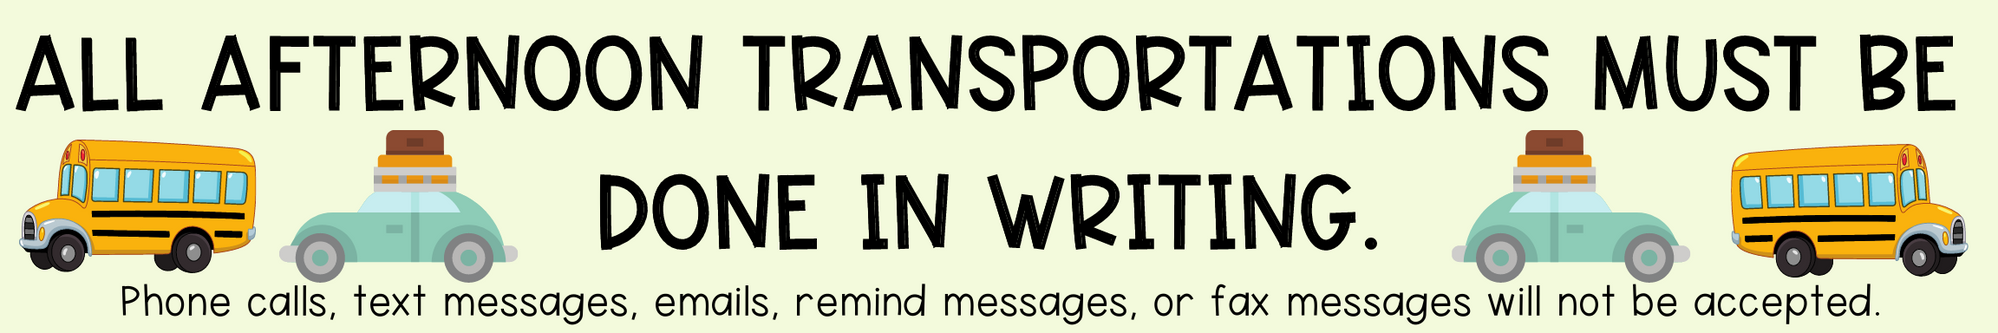 Transportation Changes must be made in writing